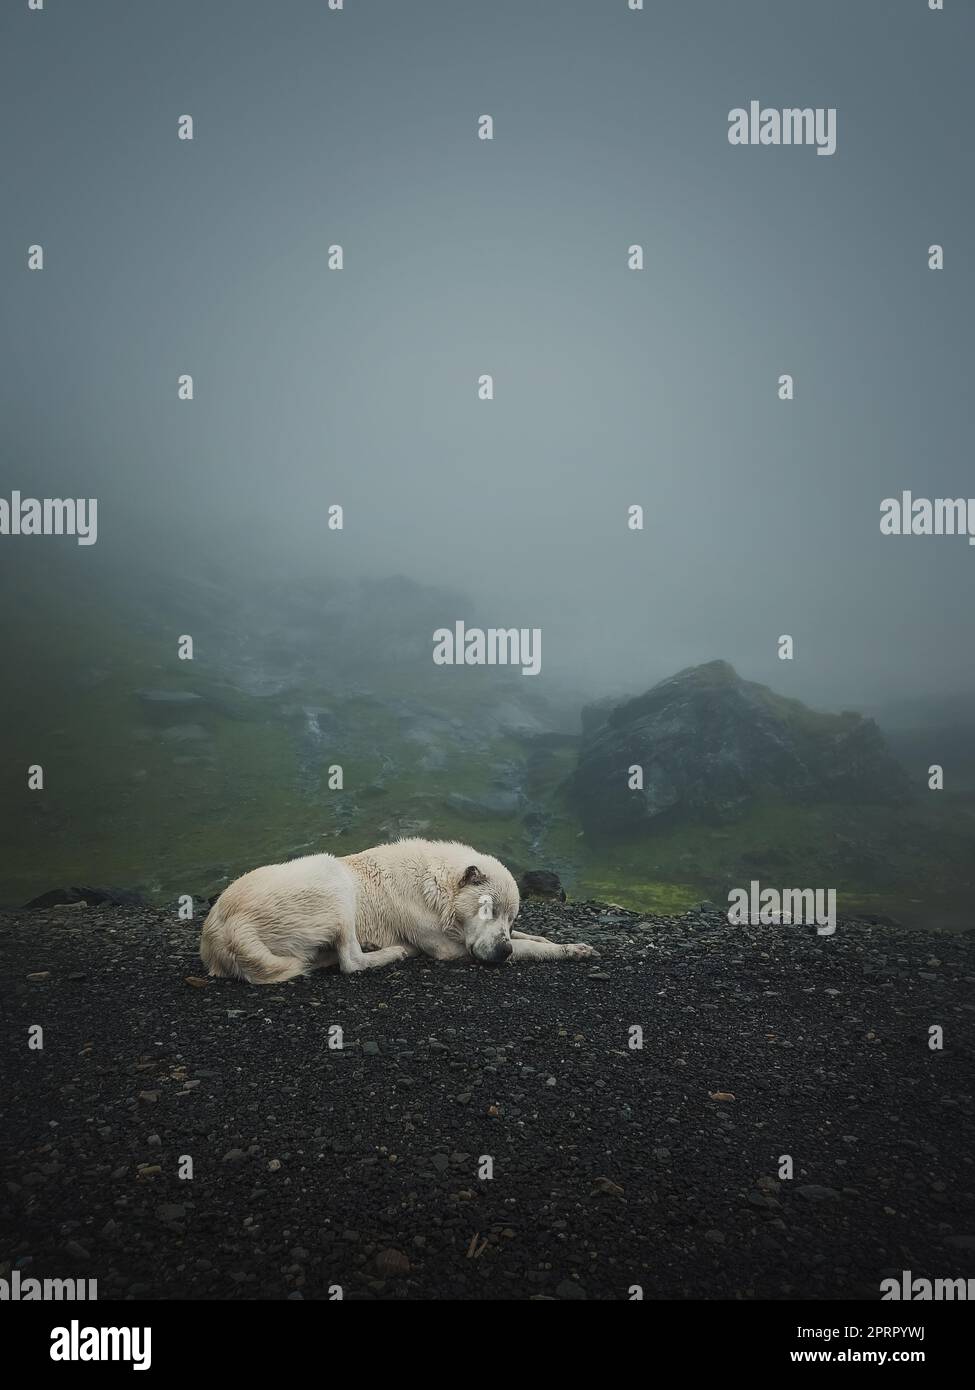 Moody and silent scene with a white, wolf like dog sleeping outdoors on ...